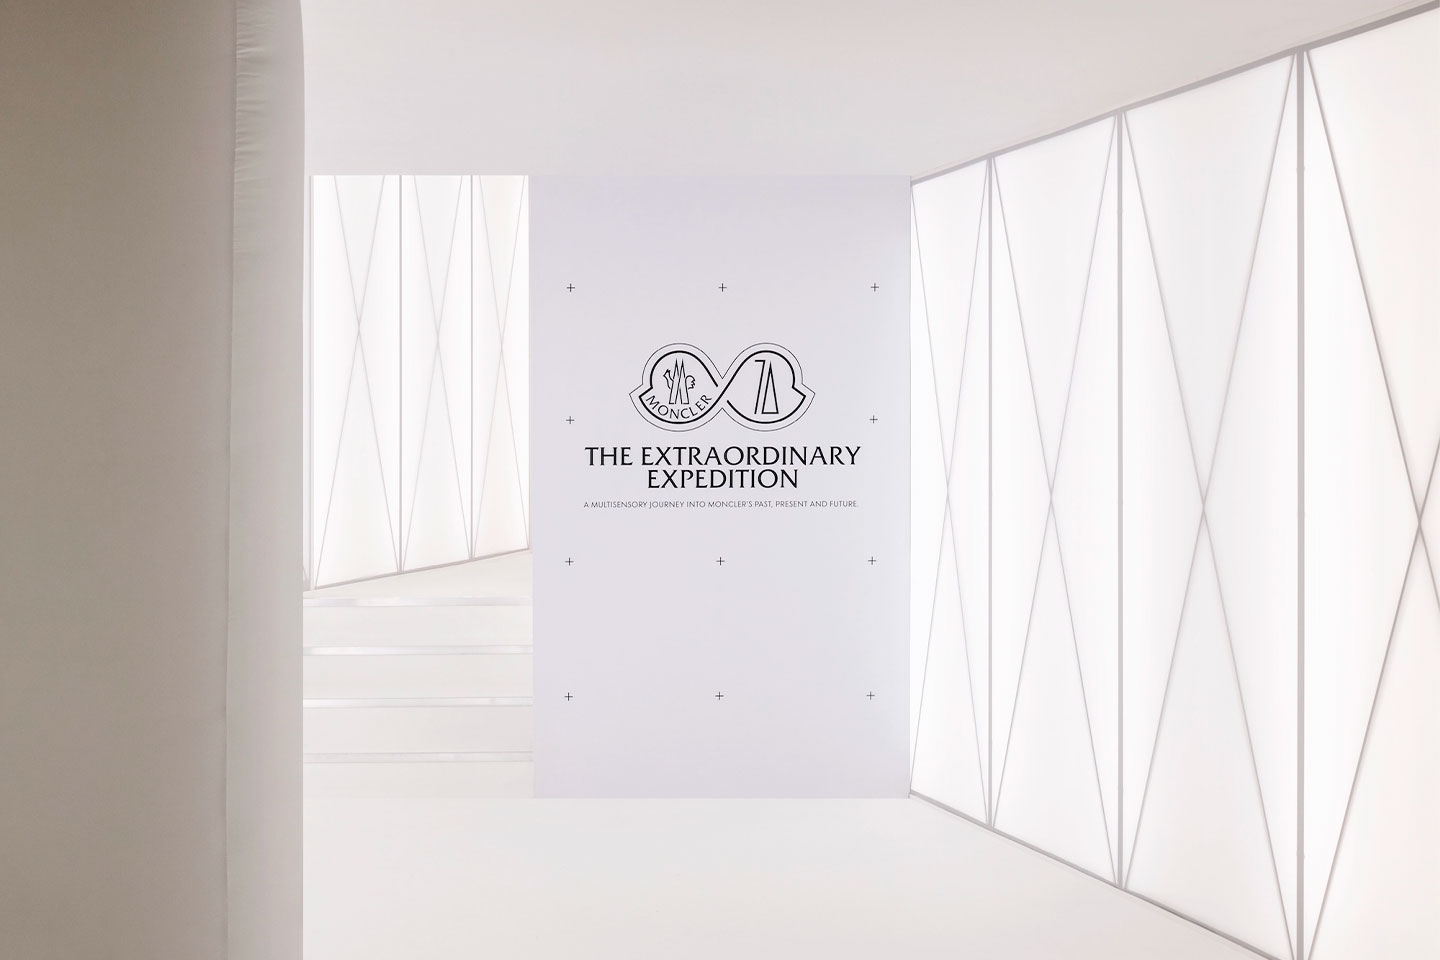 Titled “Extraordinary Expedition”, Moncler's immersive installation appeared in the heart of central London